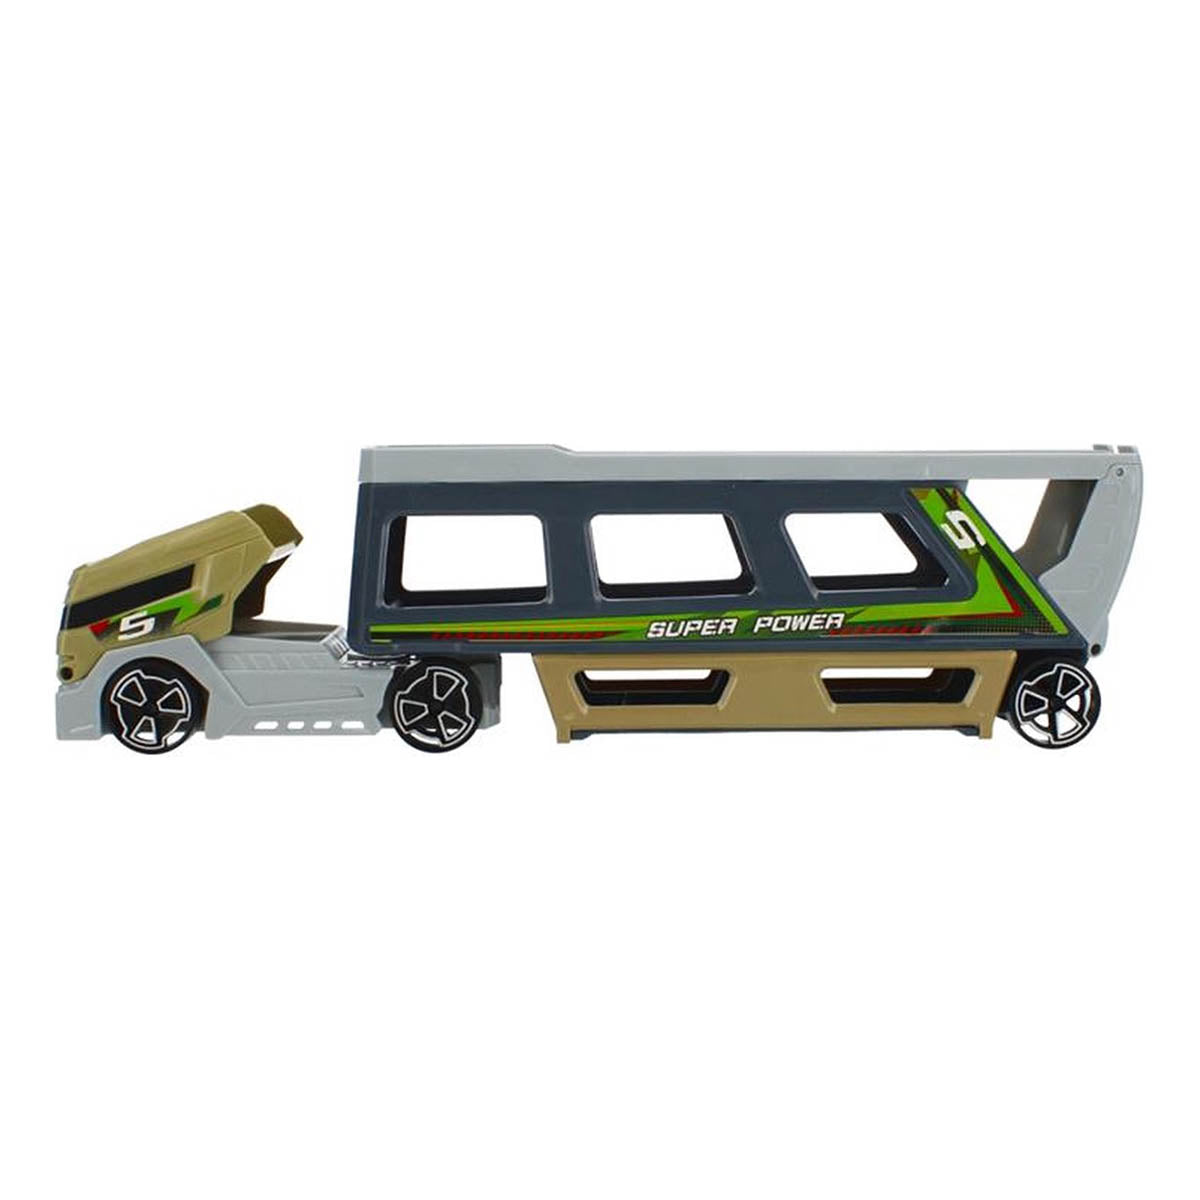 <tc>Ariko</tc> Military car transport truck - with 8 vehicles and helicopters - movable parts - storage space for 22 cars